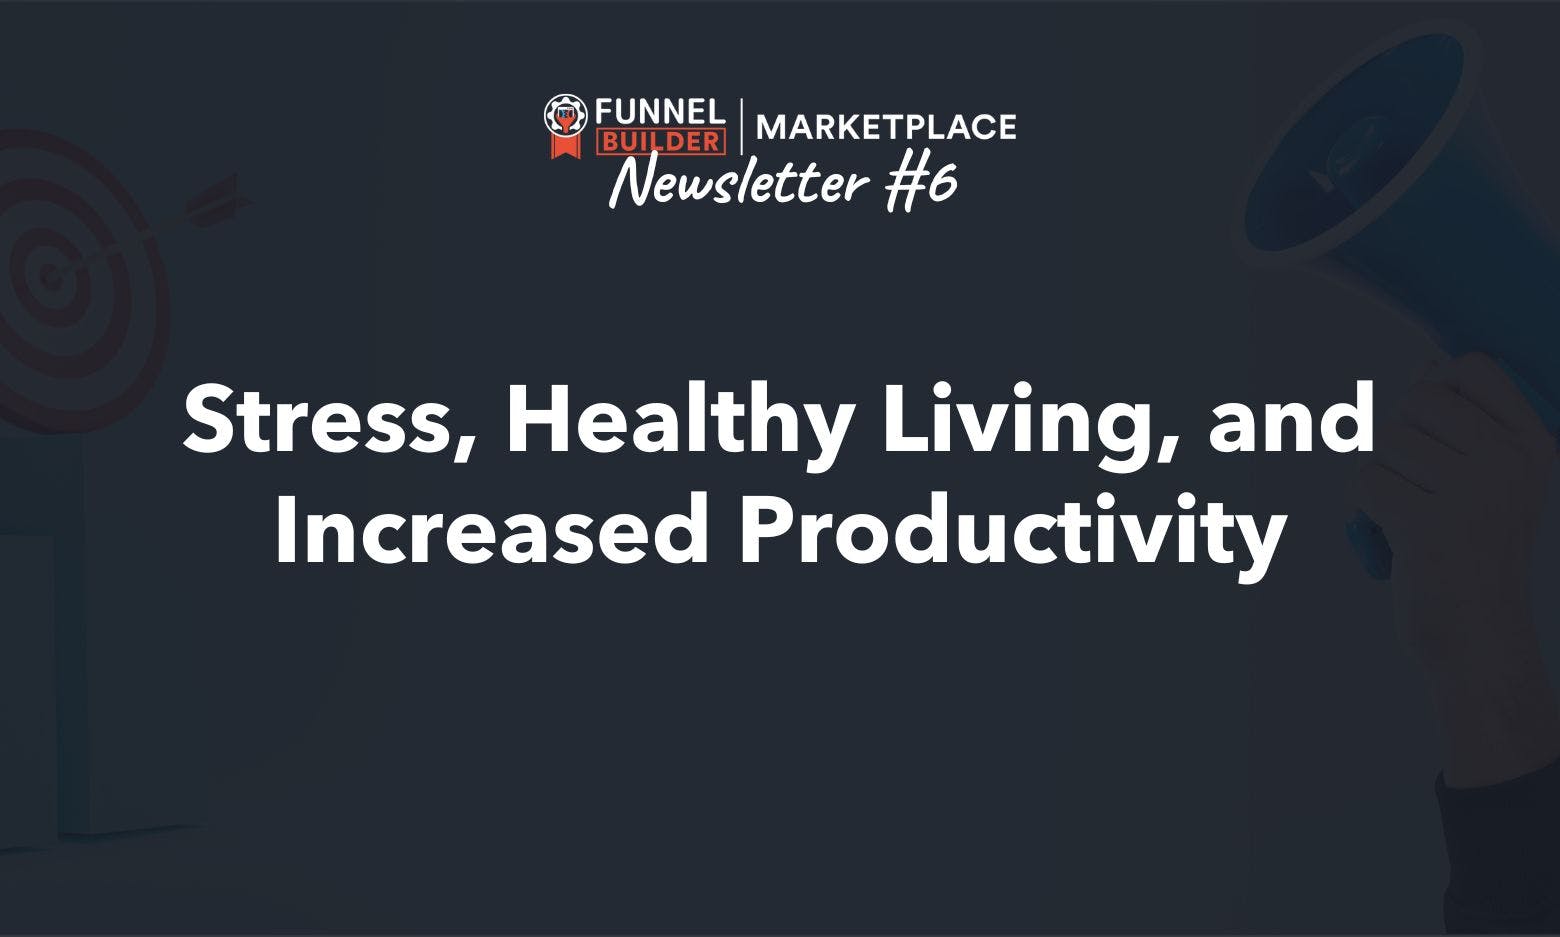 Newsletter #6: Stress, Healthy Living, and Increased Productivity